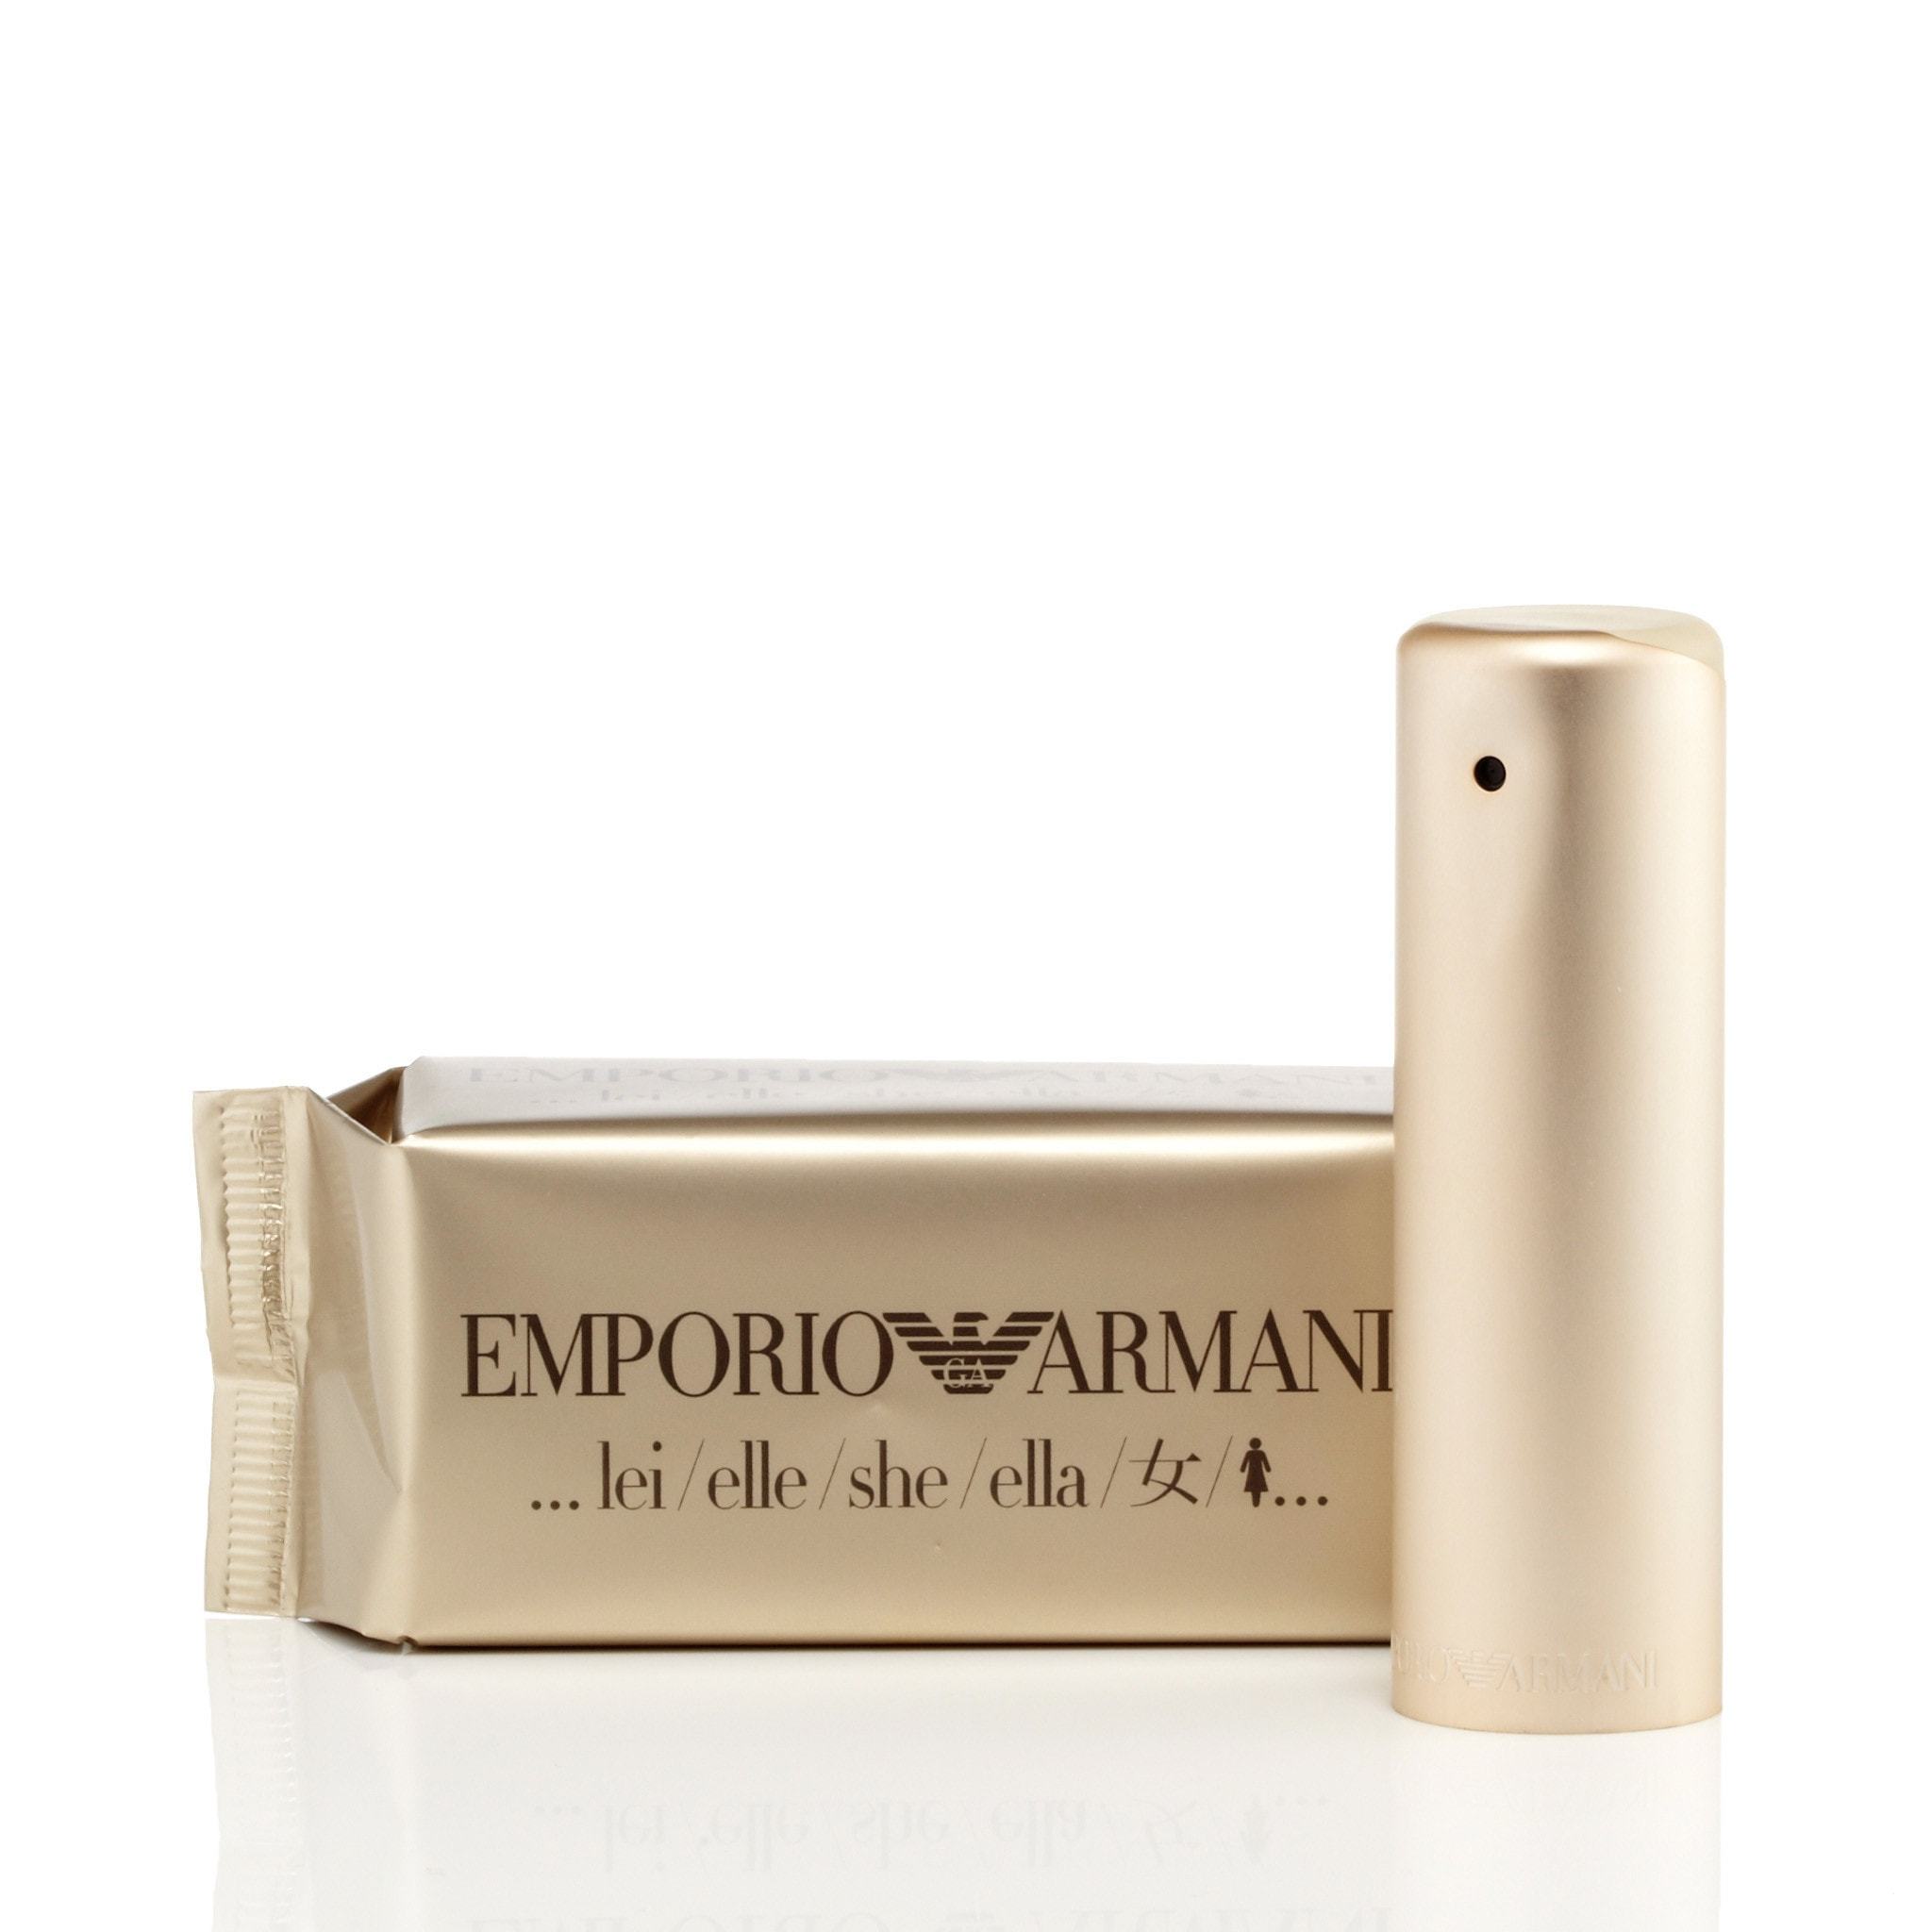 Zwembad Lagere school shit Emporio Armani EDP for Women by Giorgio Armani – Fragrance Outlet